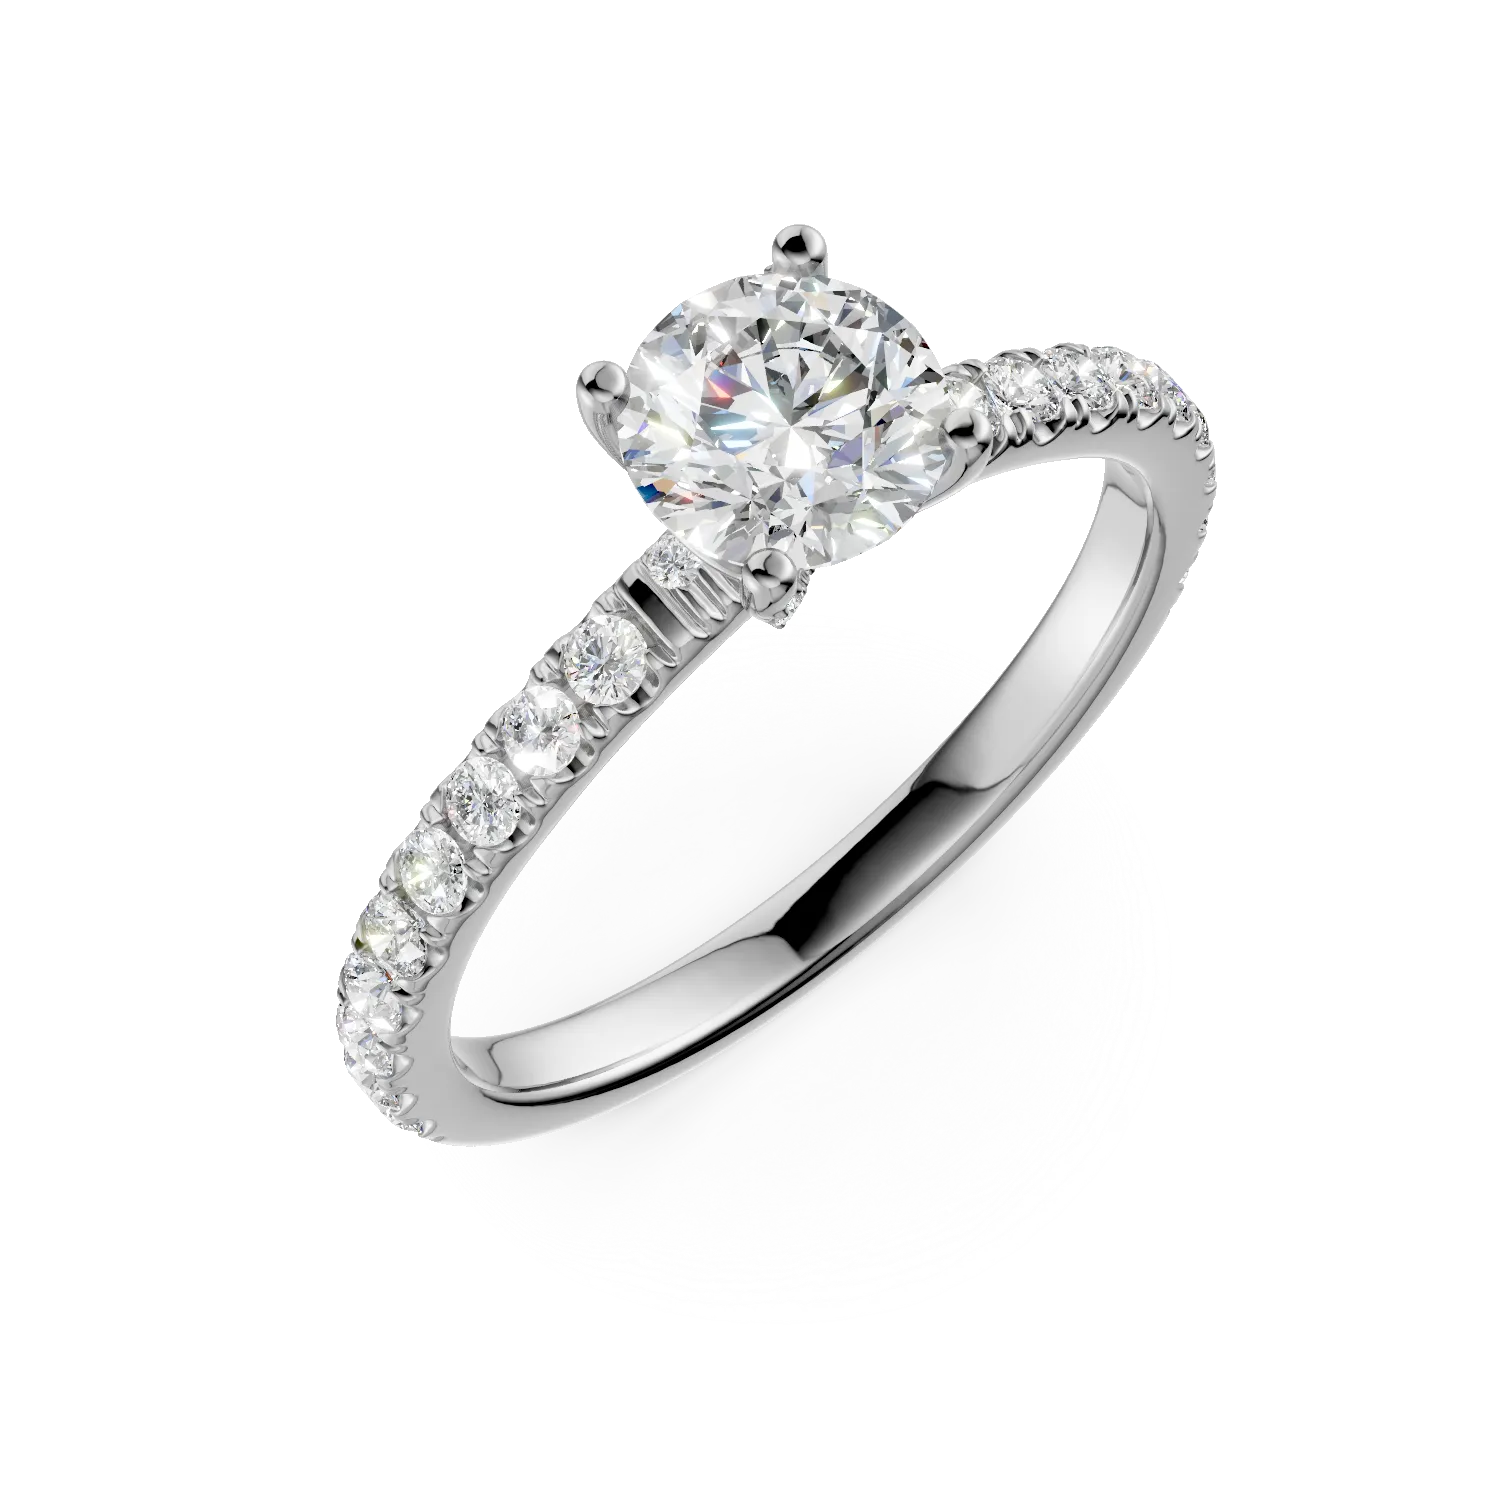 White gold engagement ring with 0.71ct diamond and 0.42ct diamonds